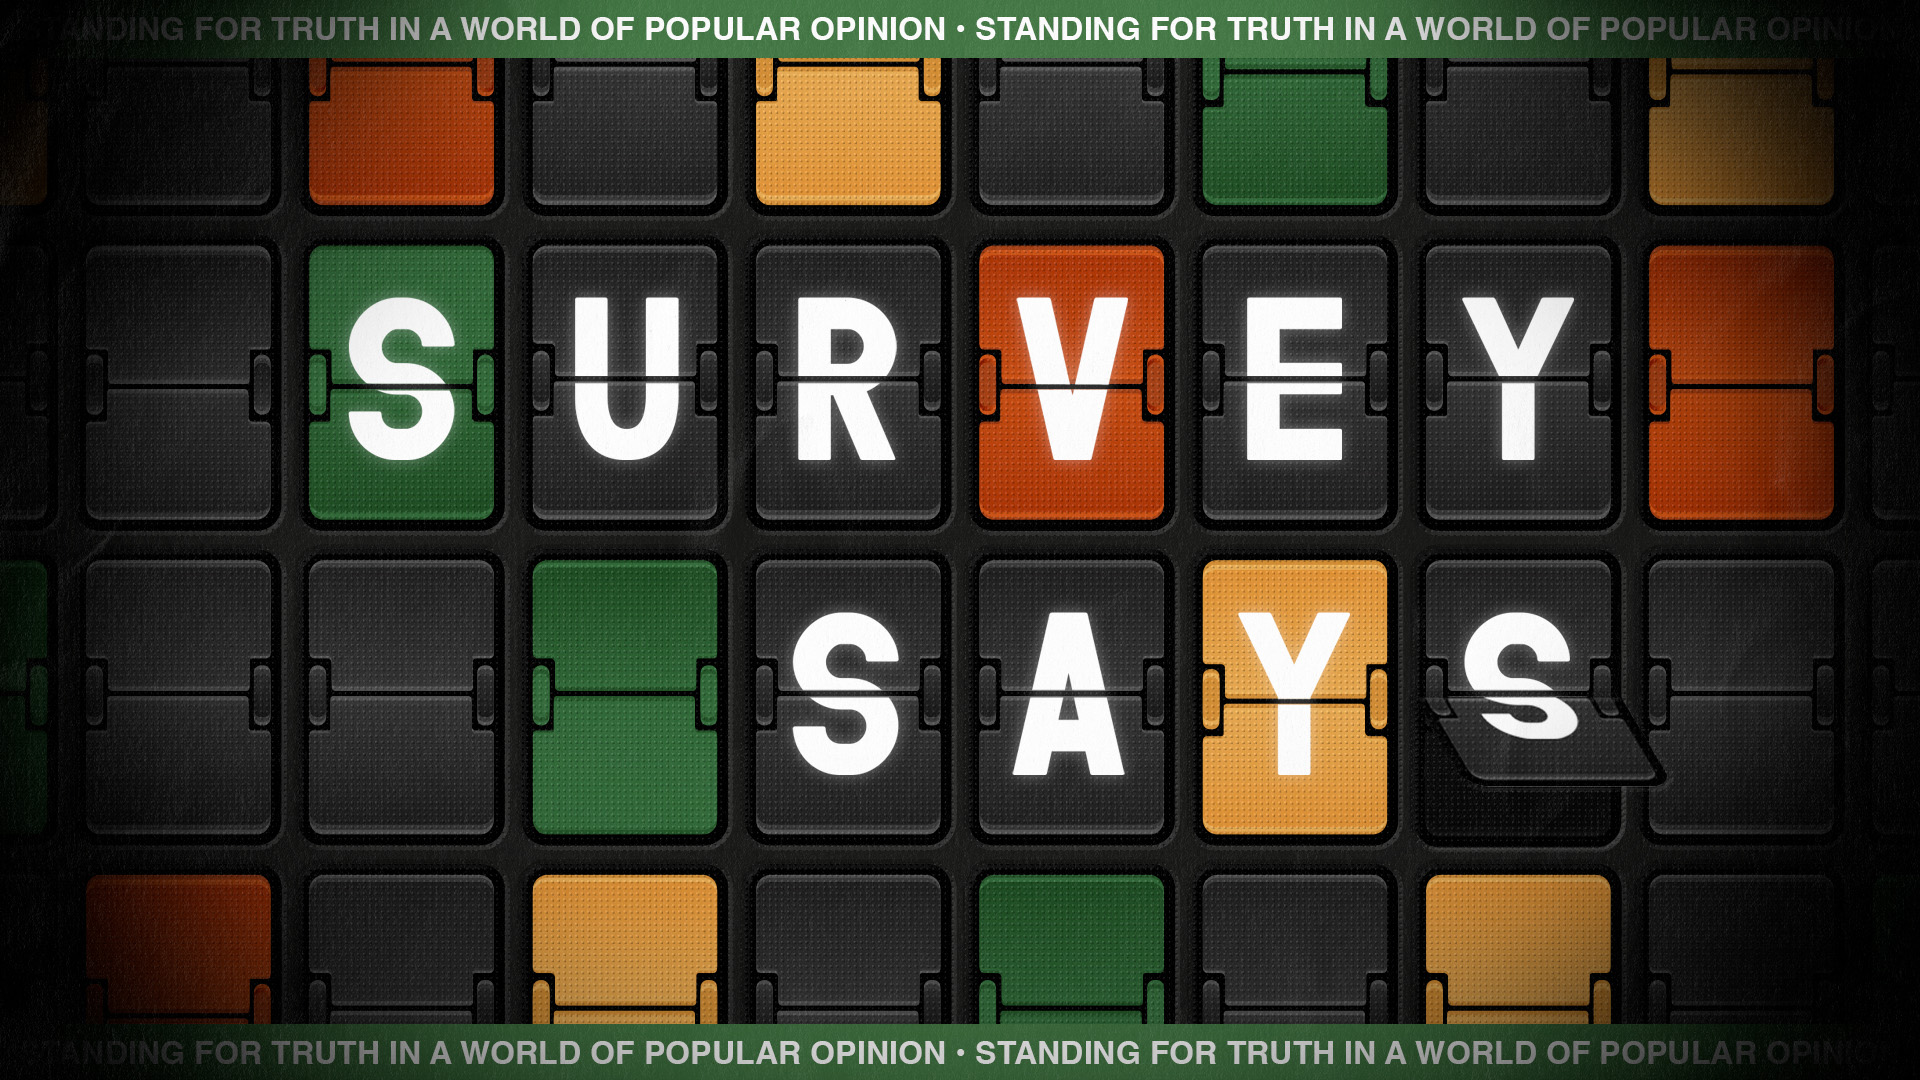 Current Message Series: Survey Says Image